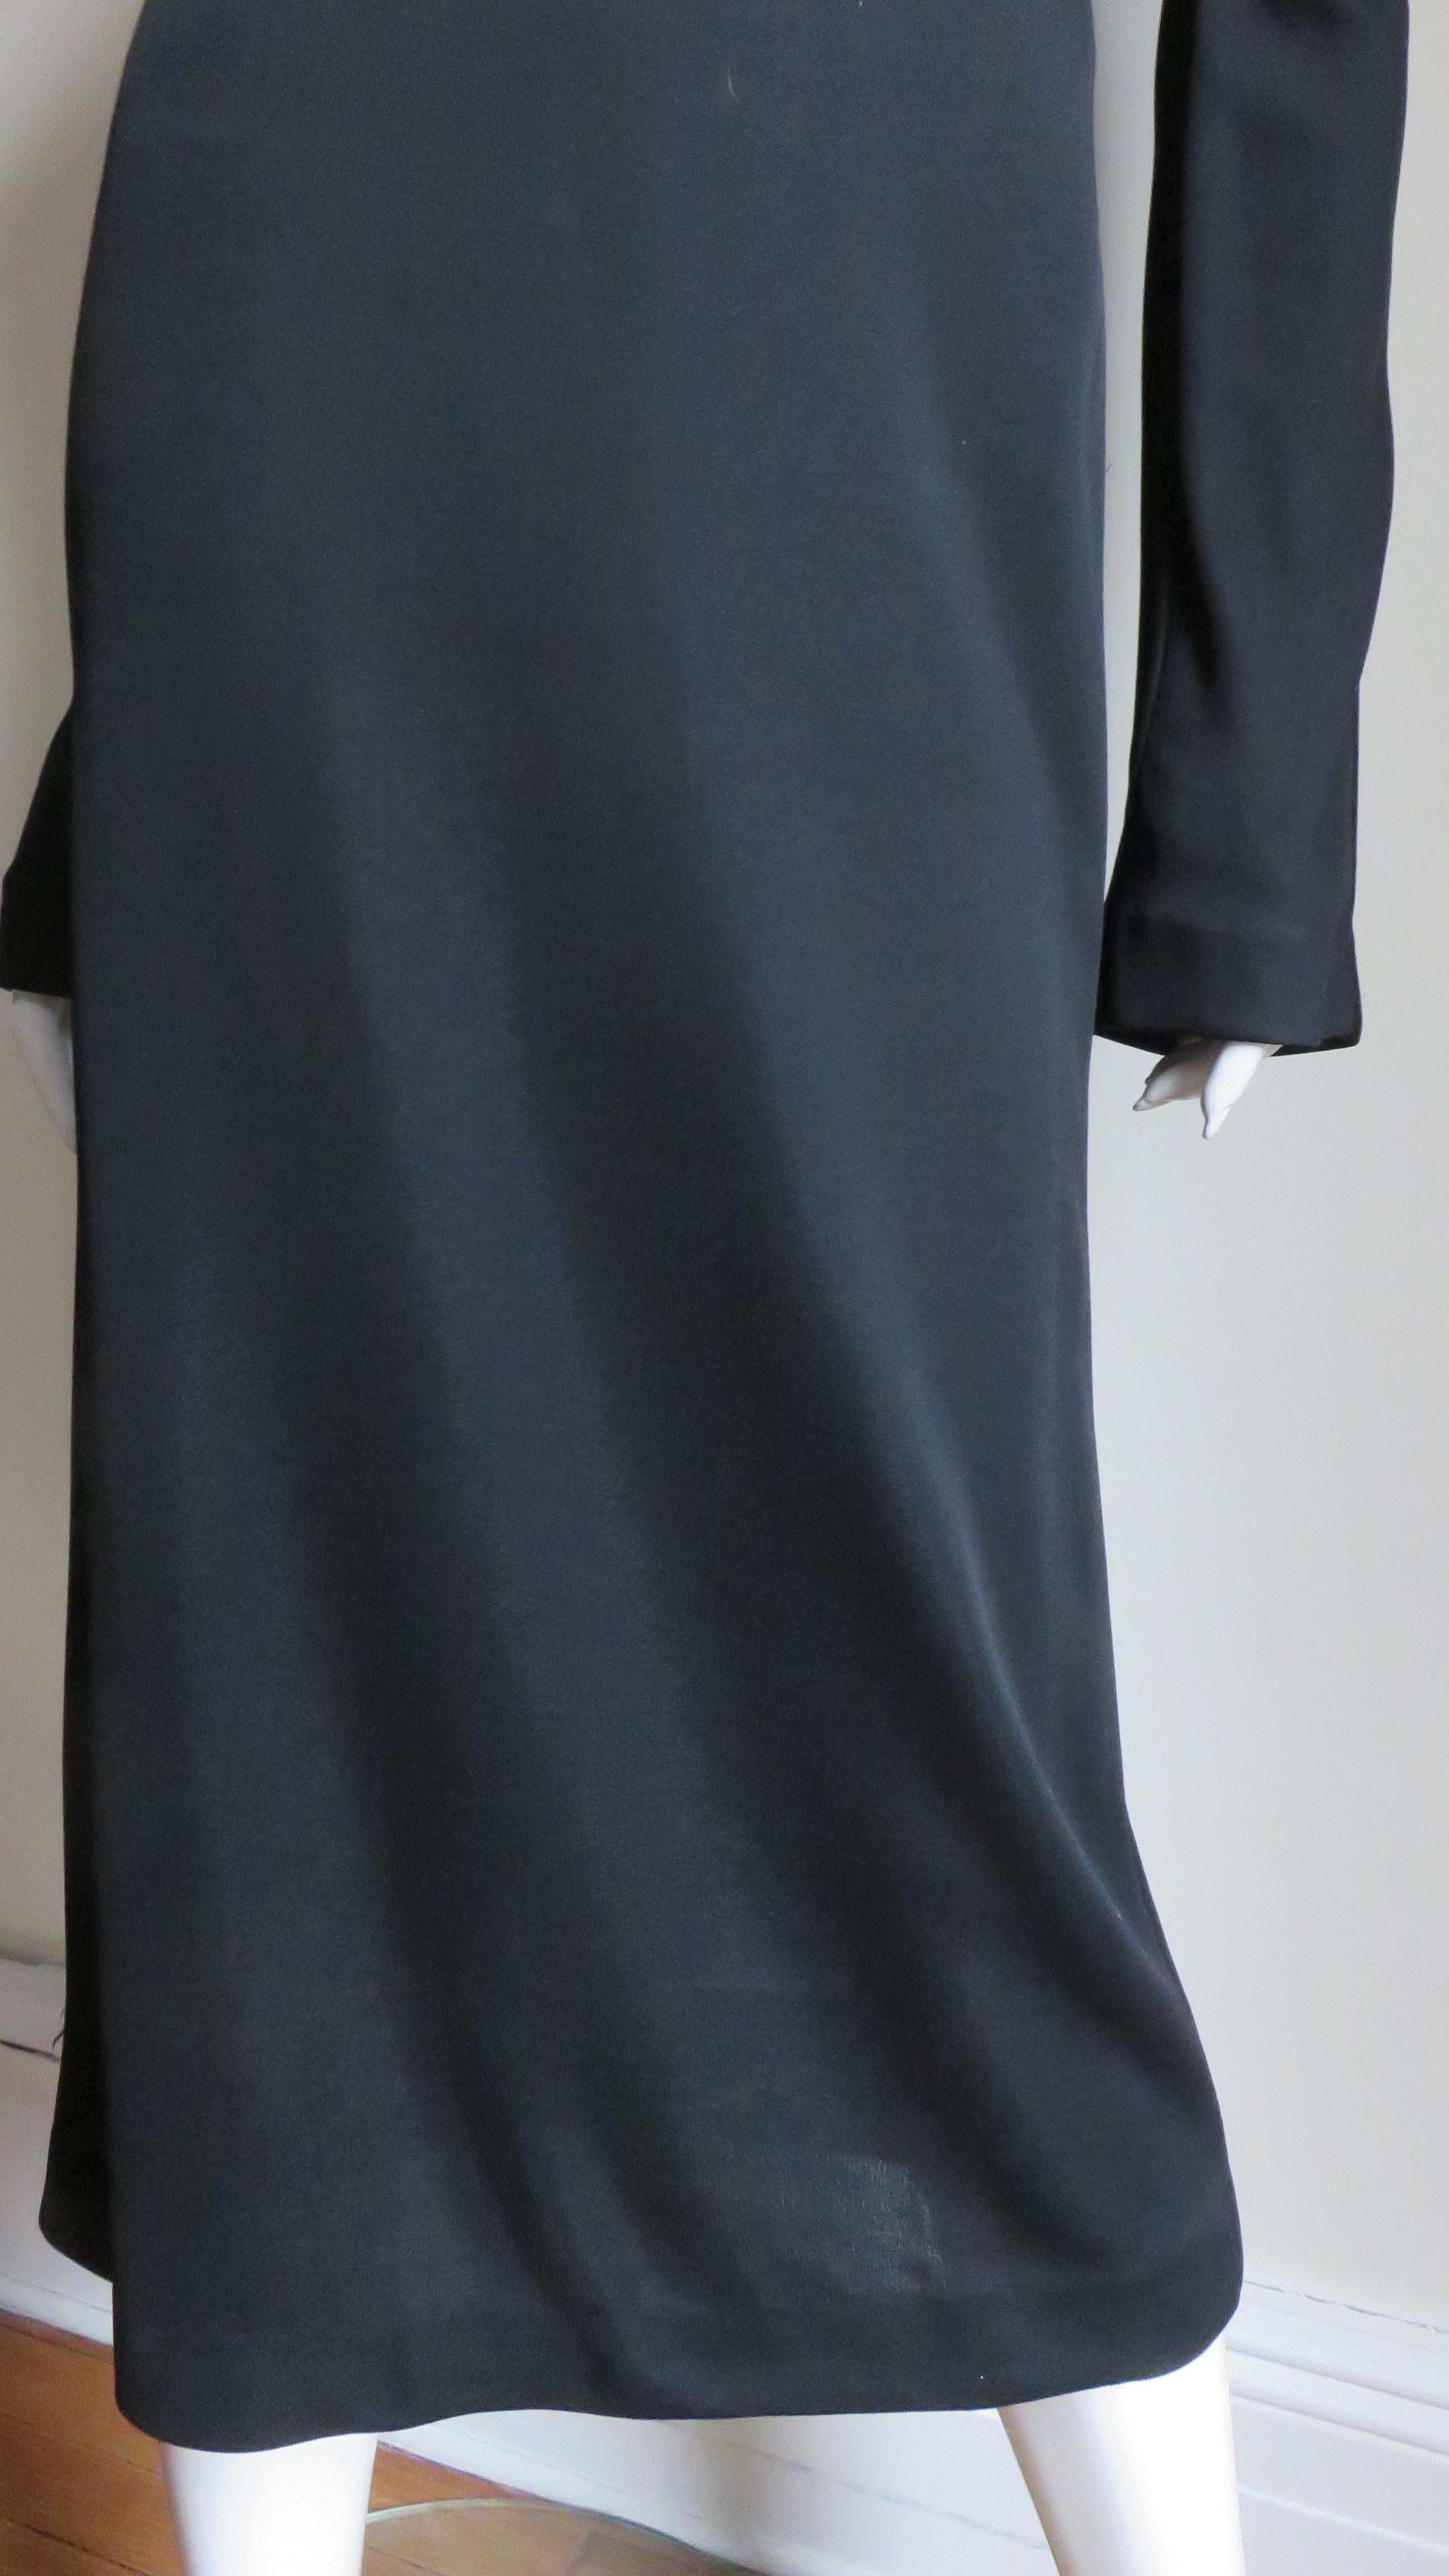 Gianni Versace Couture 1990s Bell Sleeve Dress In Good Condition For Sale In Water Mill, NY